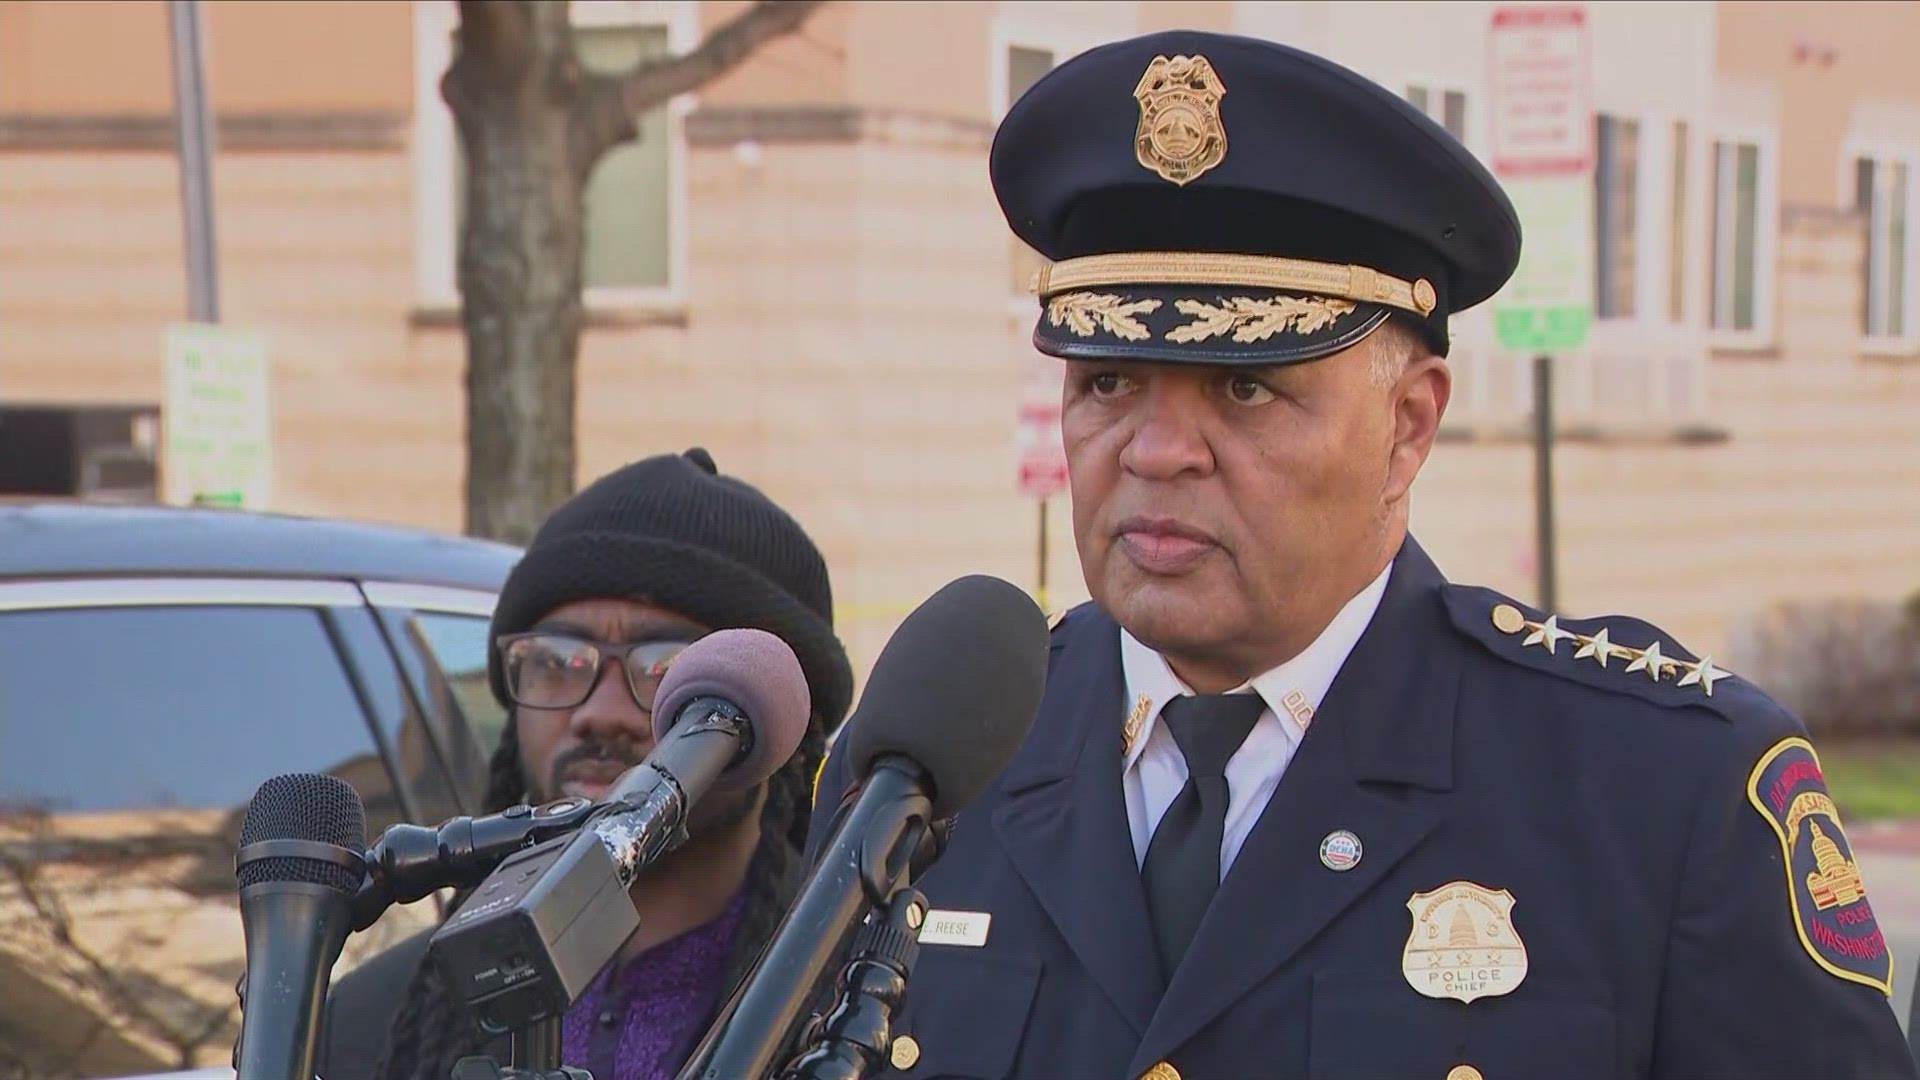 Housing Authority Police Department Chief Michael Reese gave an update on the shooting.